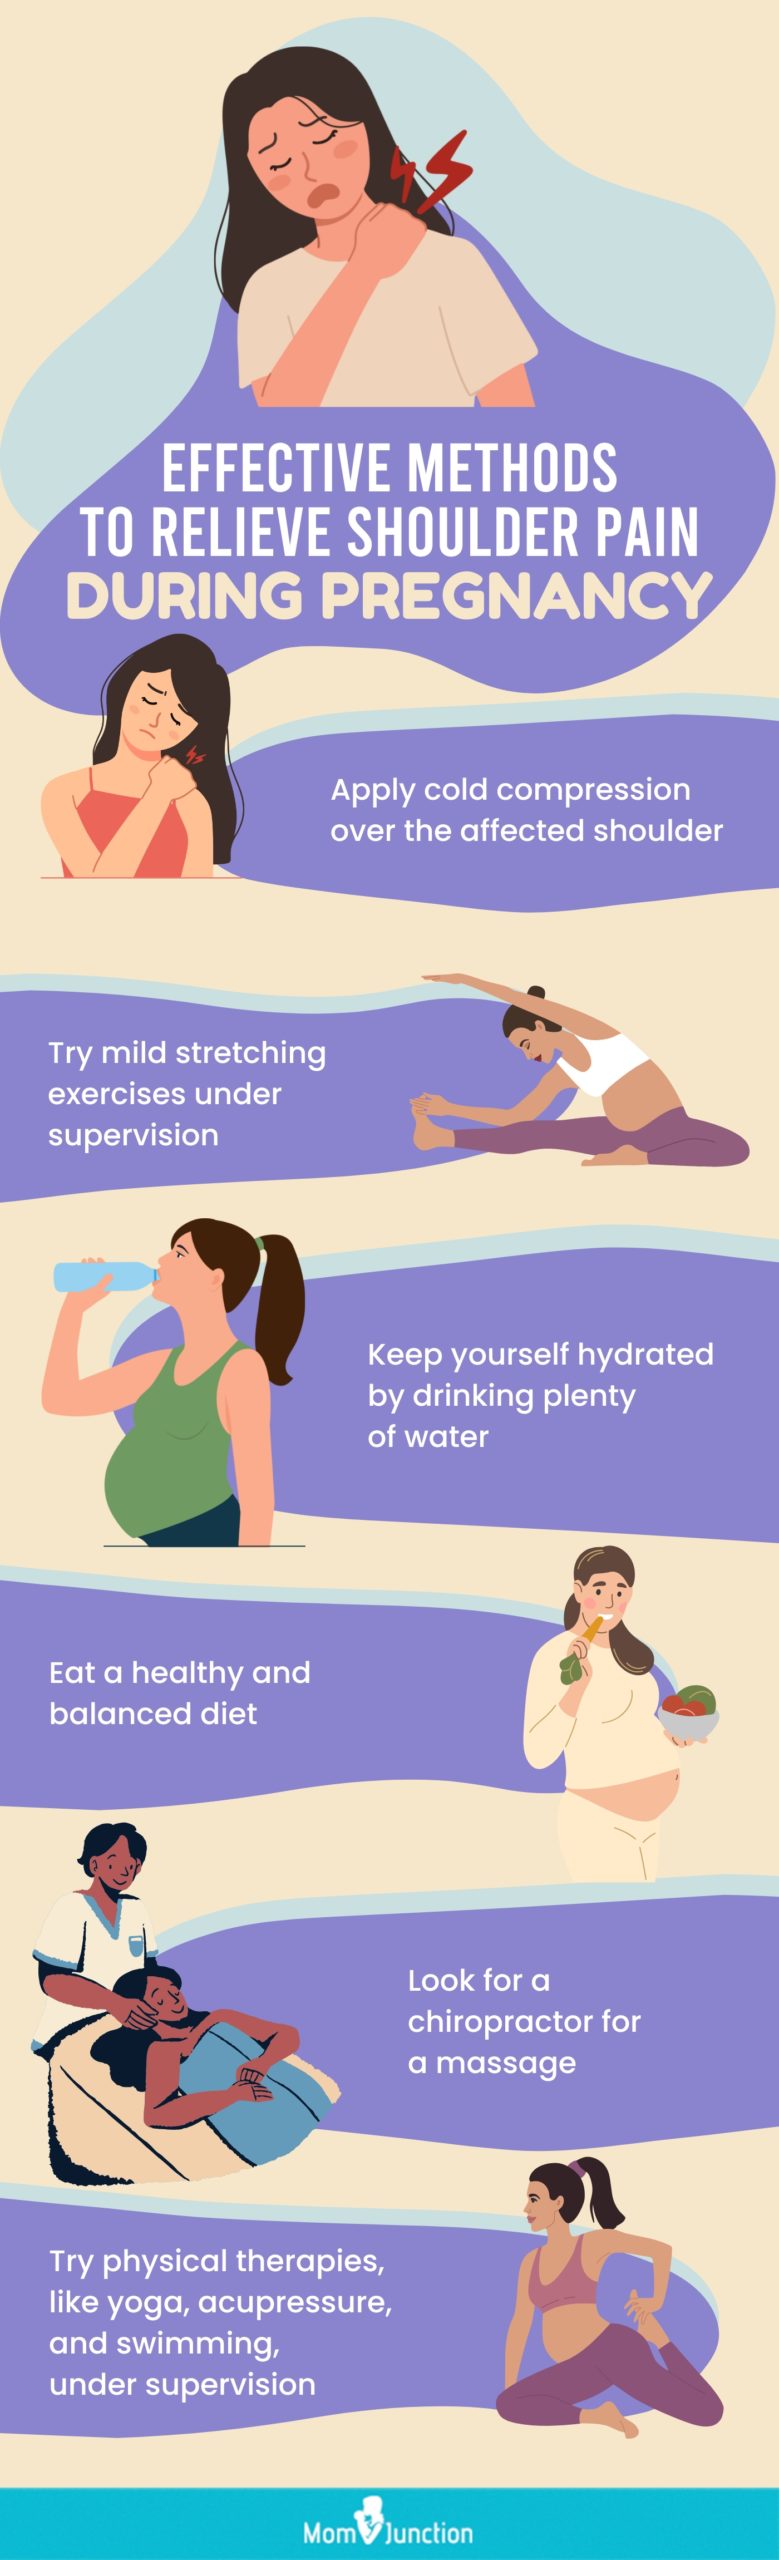 effective methods to relieve shoulder pain during pregnancy (infographic)